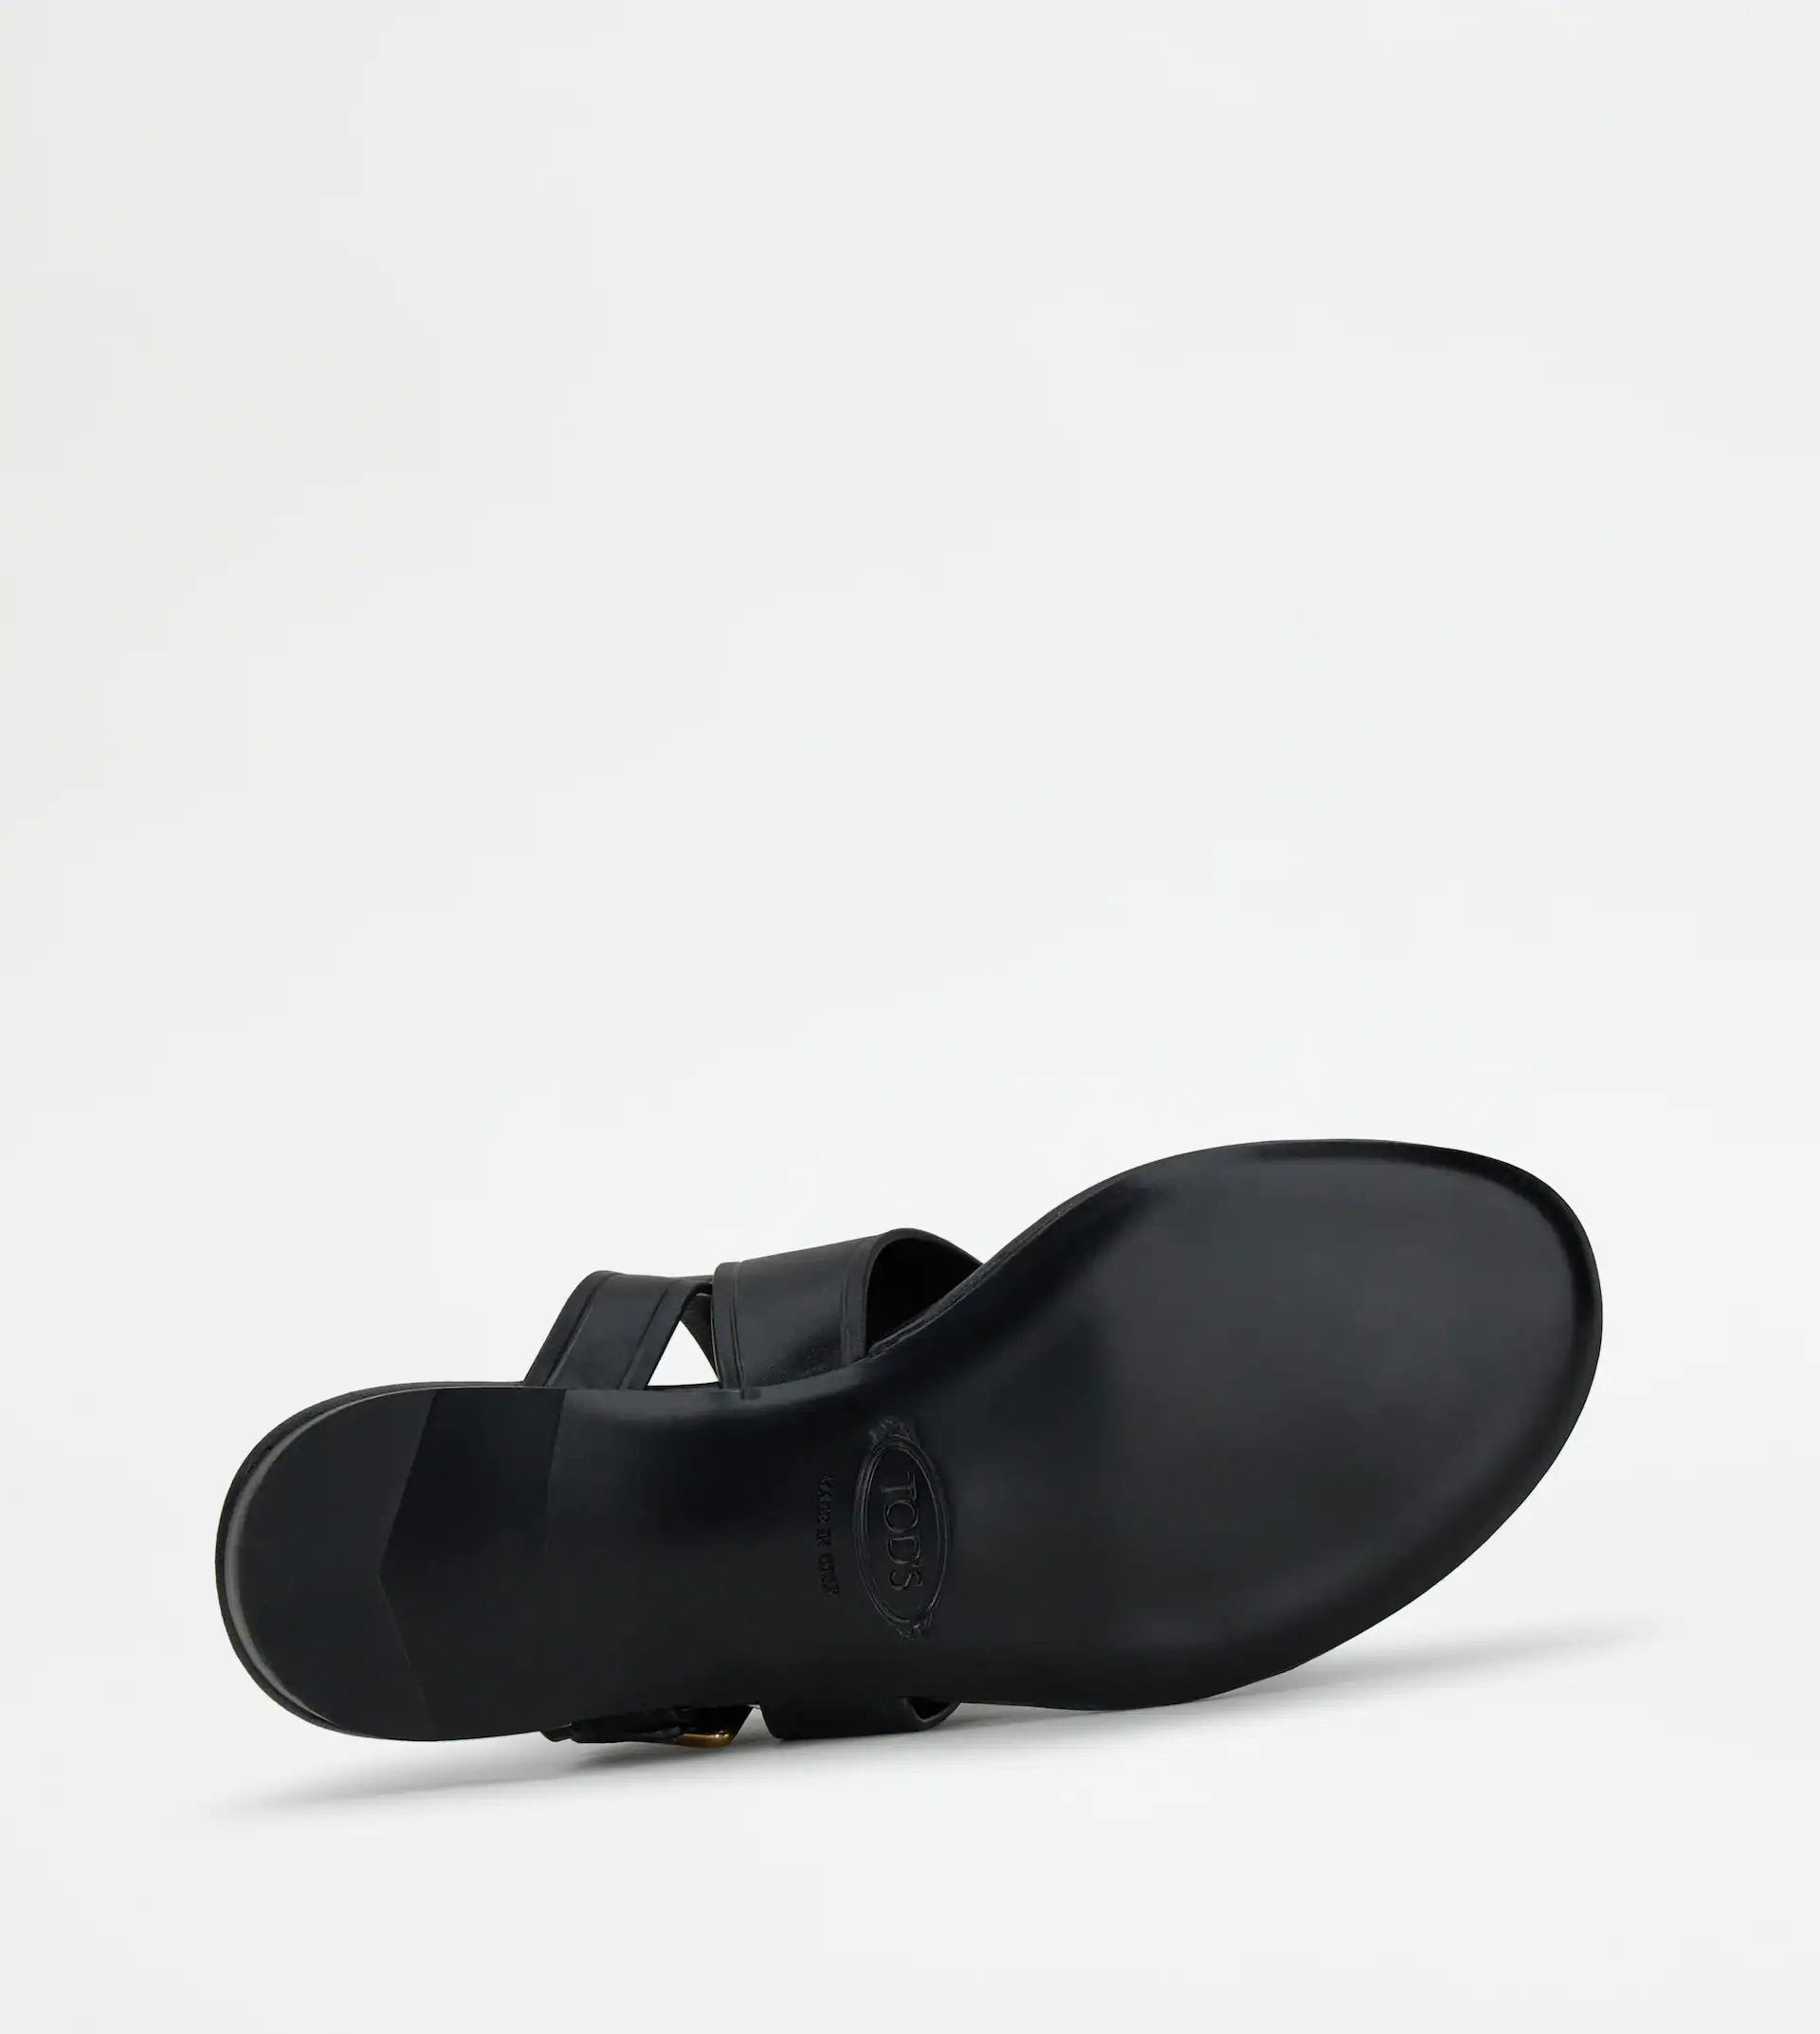 THONG SANDALS IN LEATHER - BLACK - 4